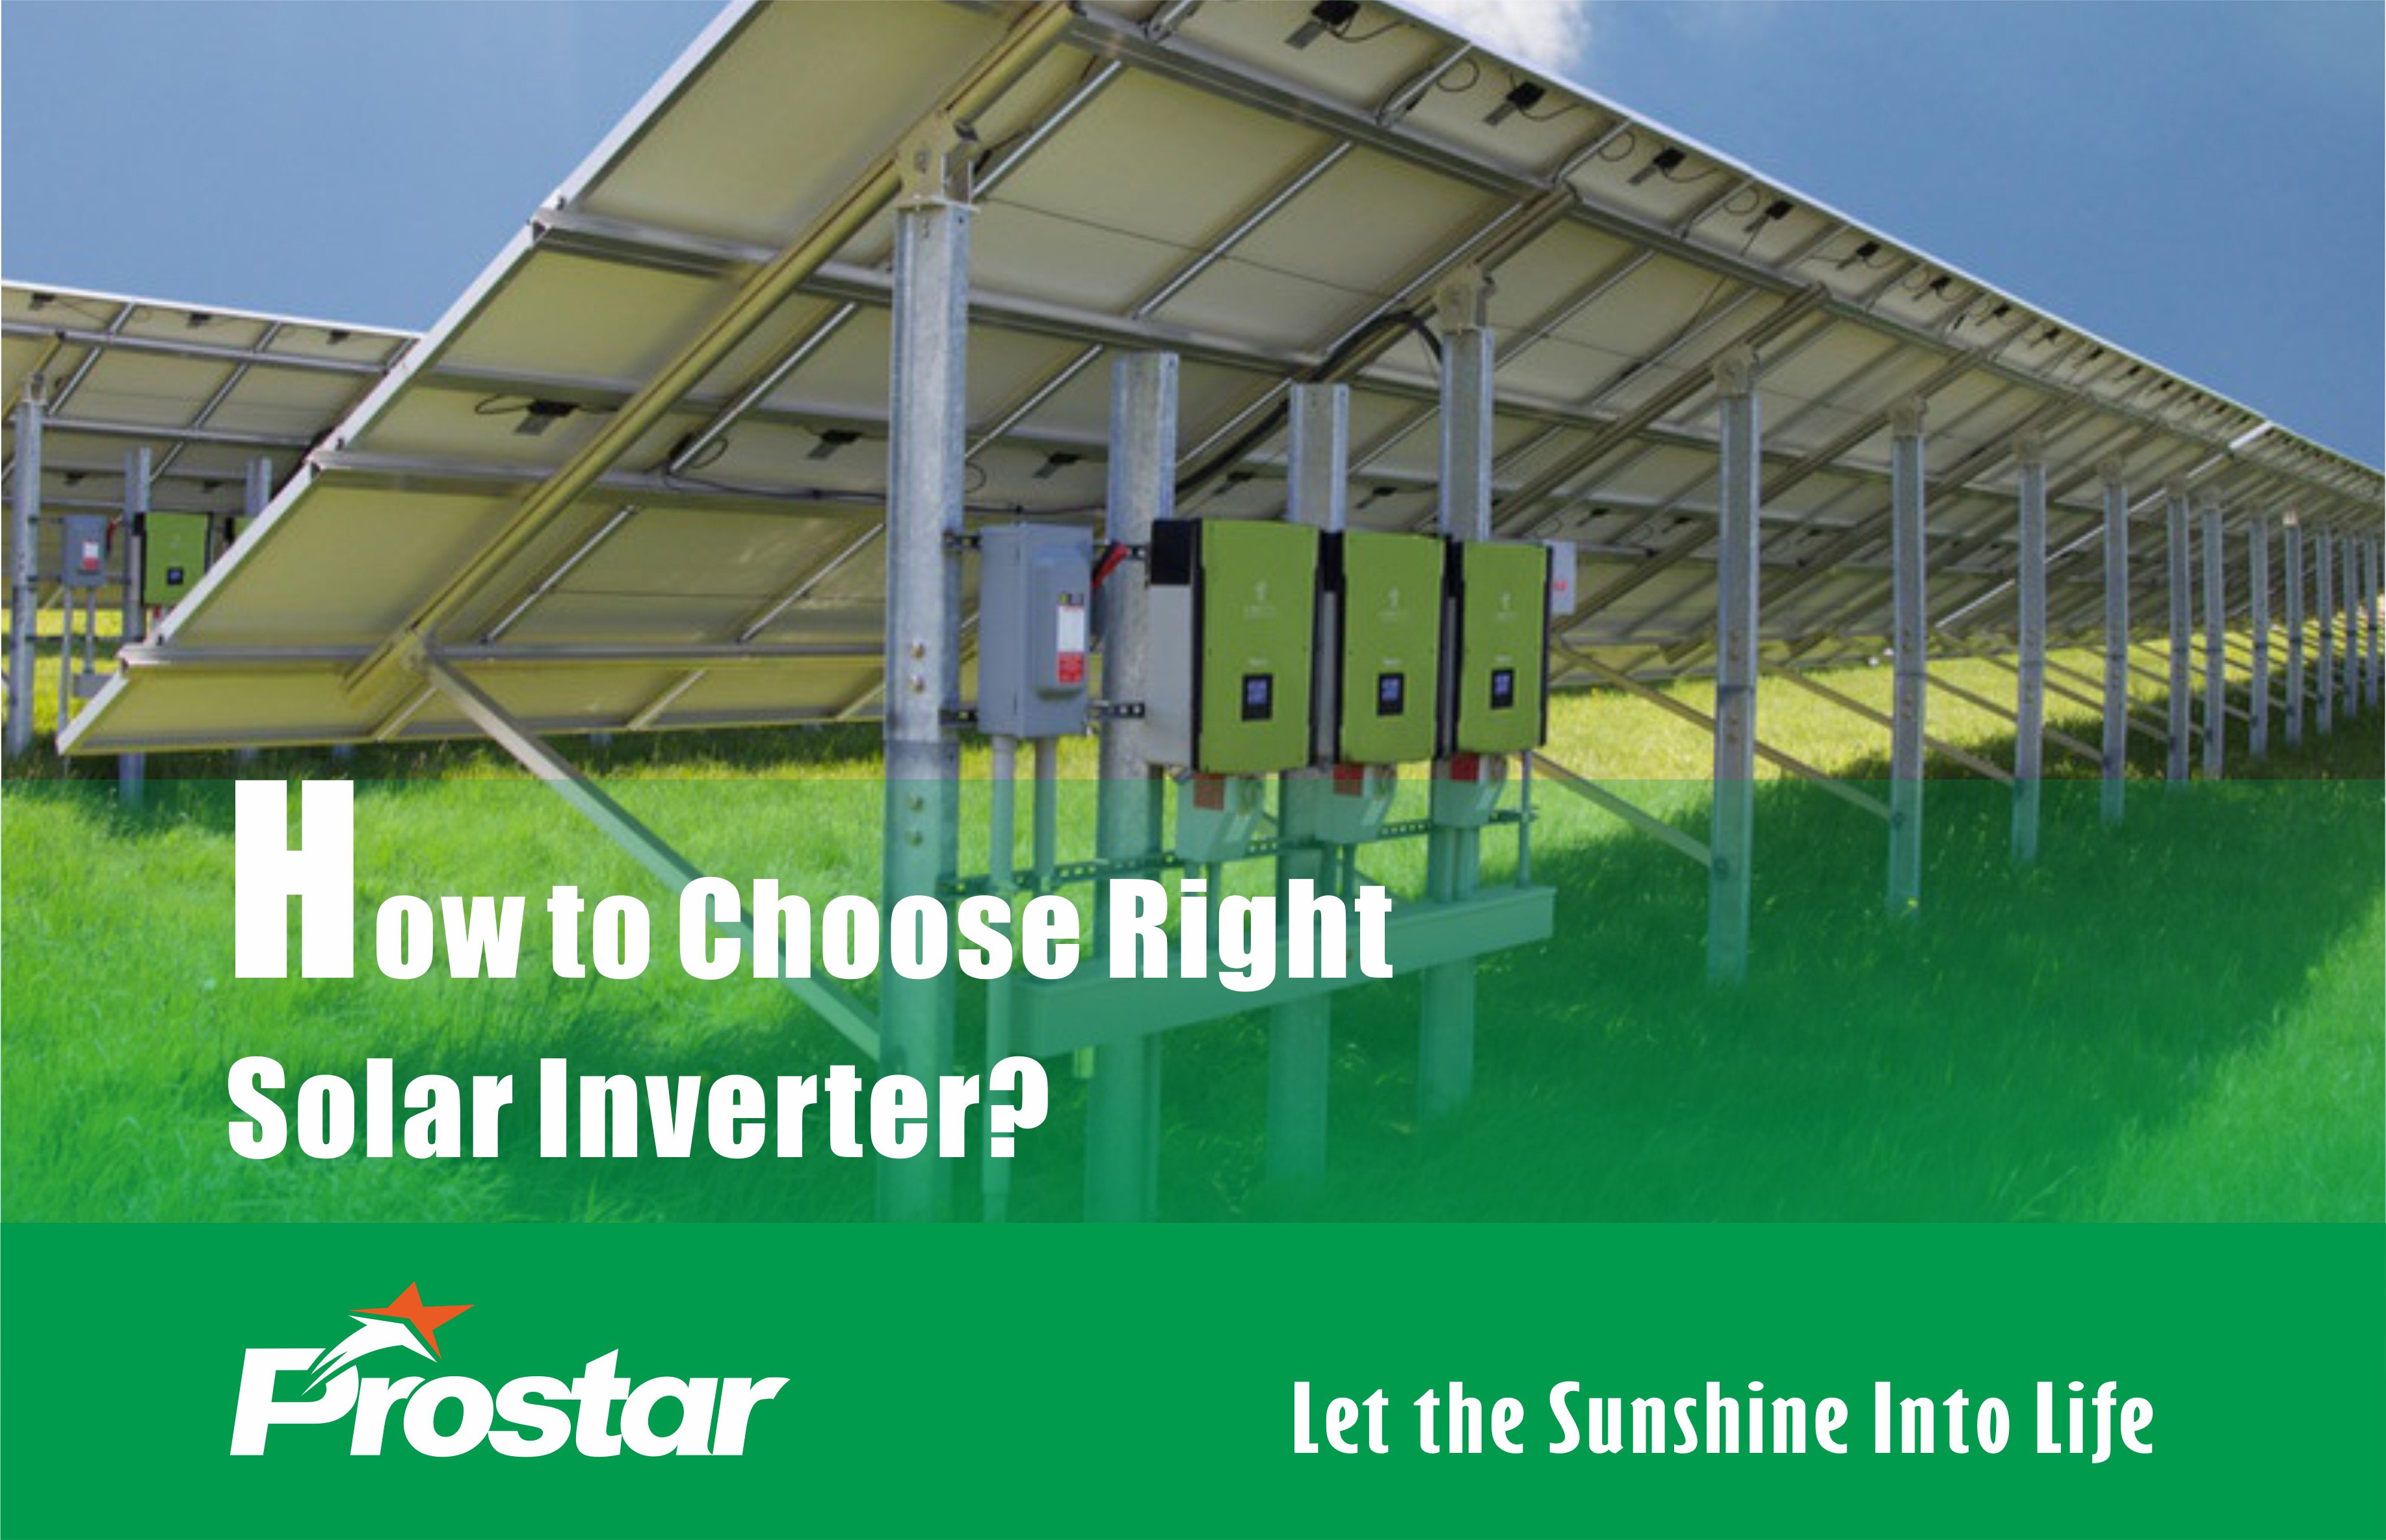 How to Choose Right Solar Inverter?